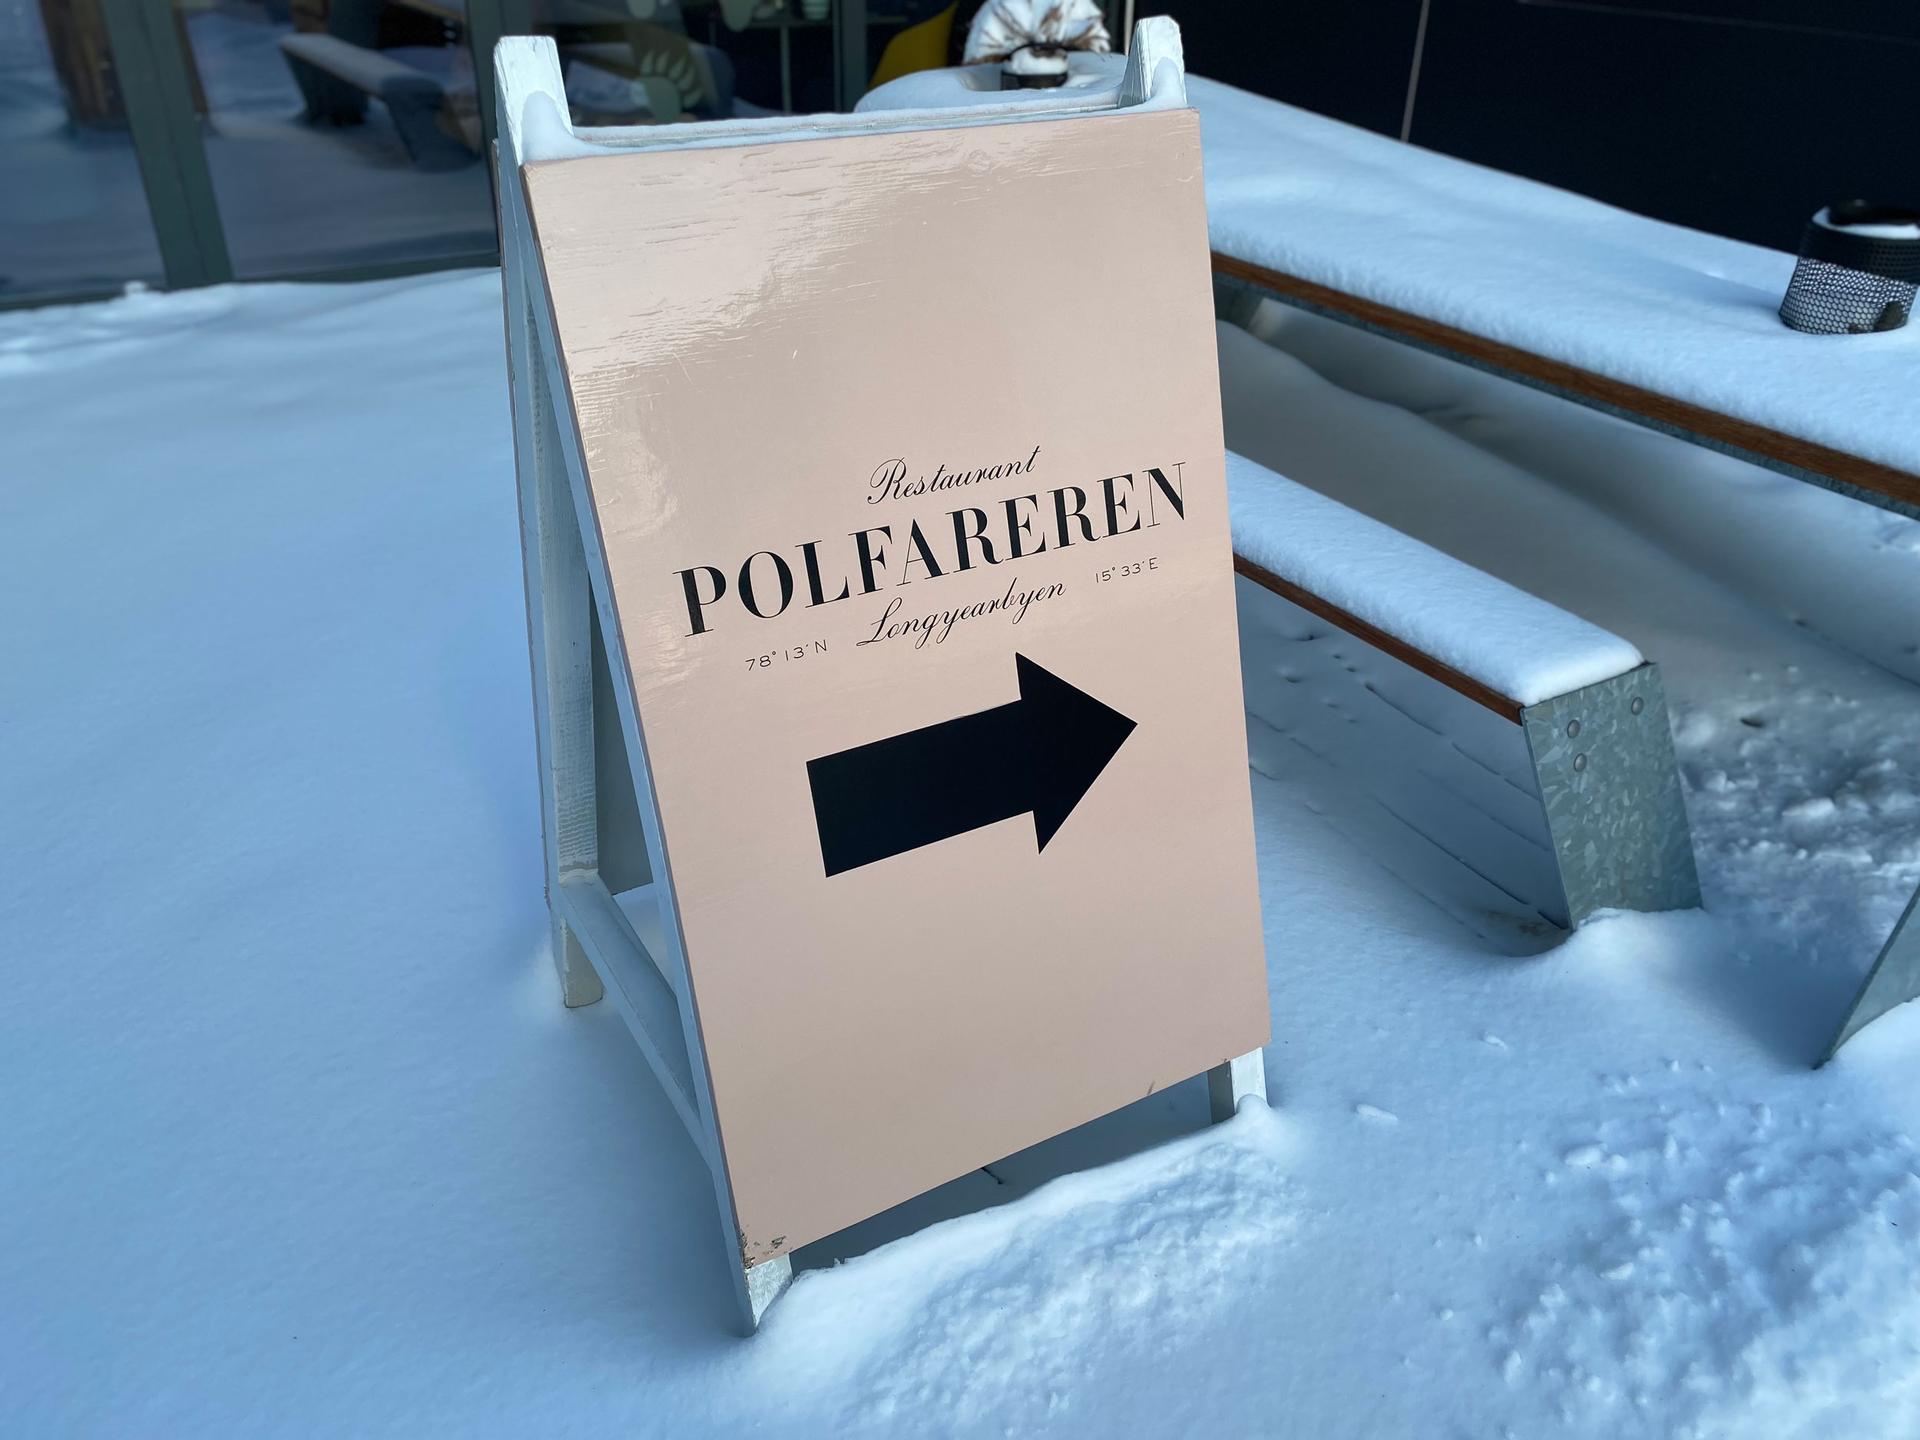 In the high tourist season, when the sun is out and the snow hasn’t melted, Restaurant Polfareren is booked up just about every night.